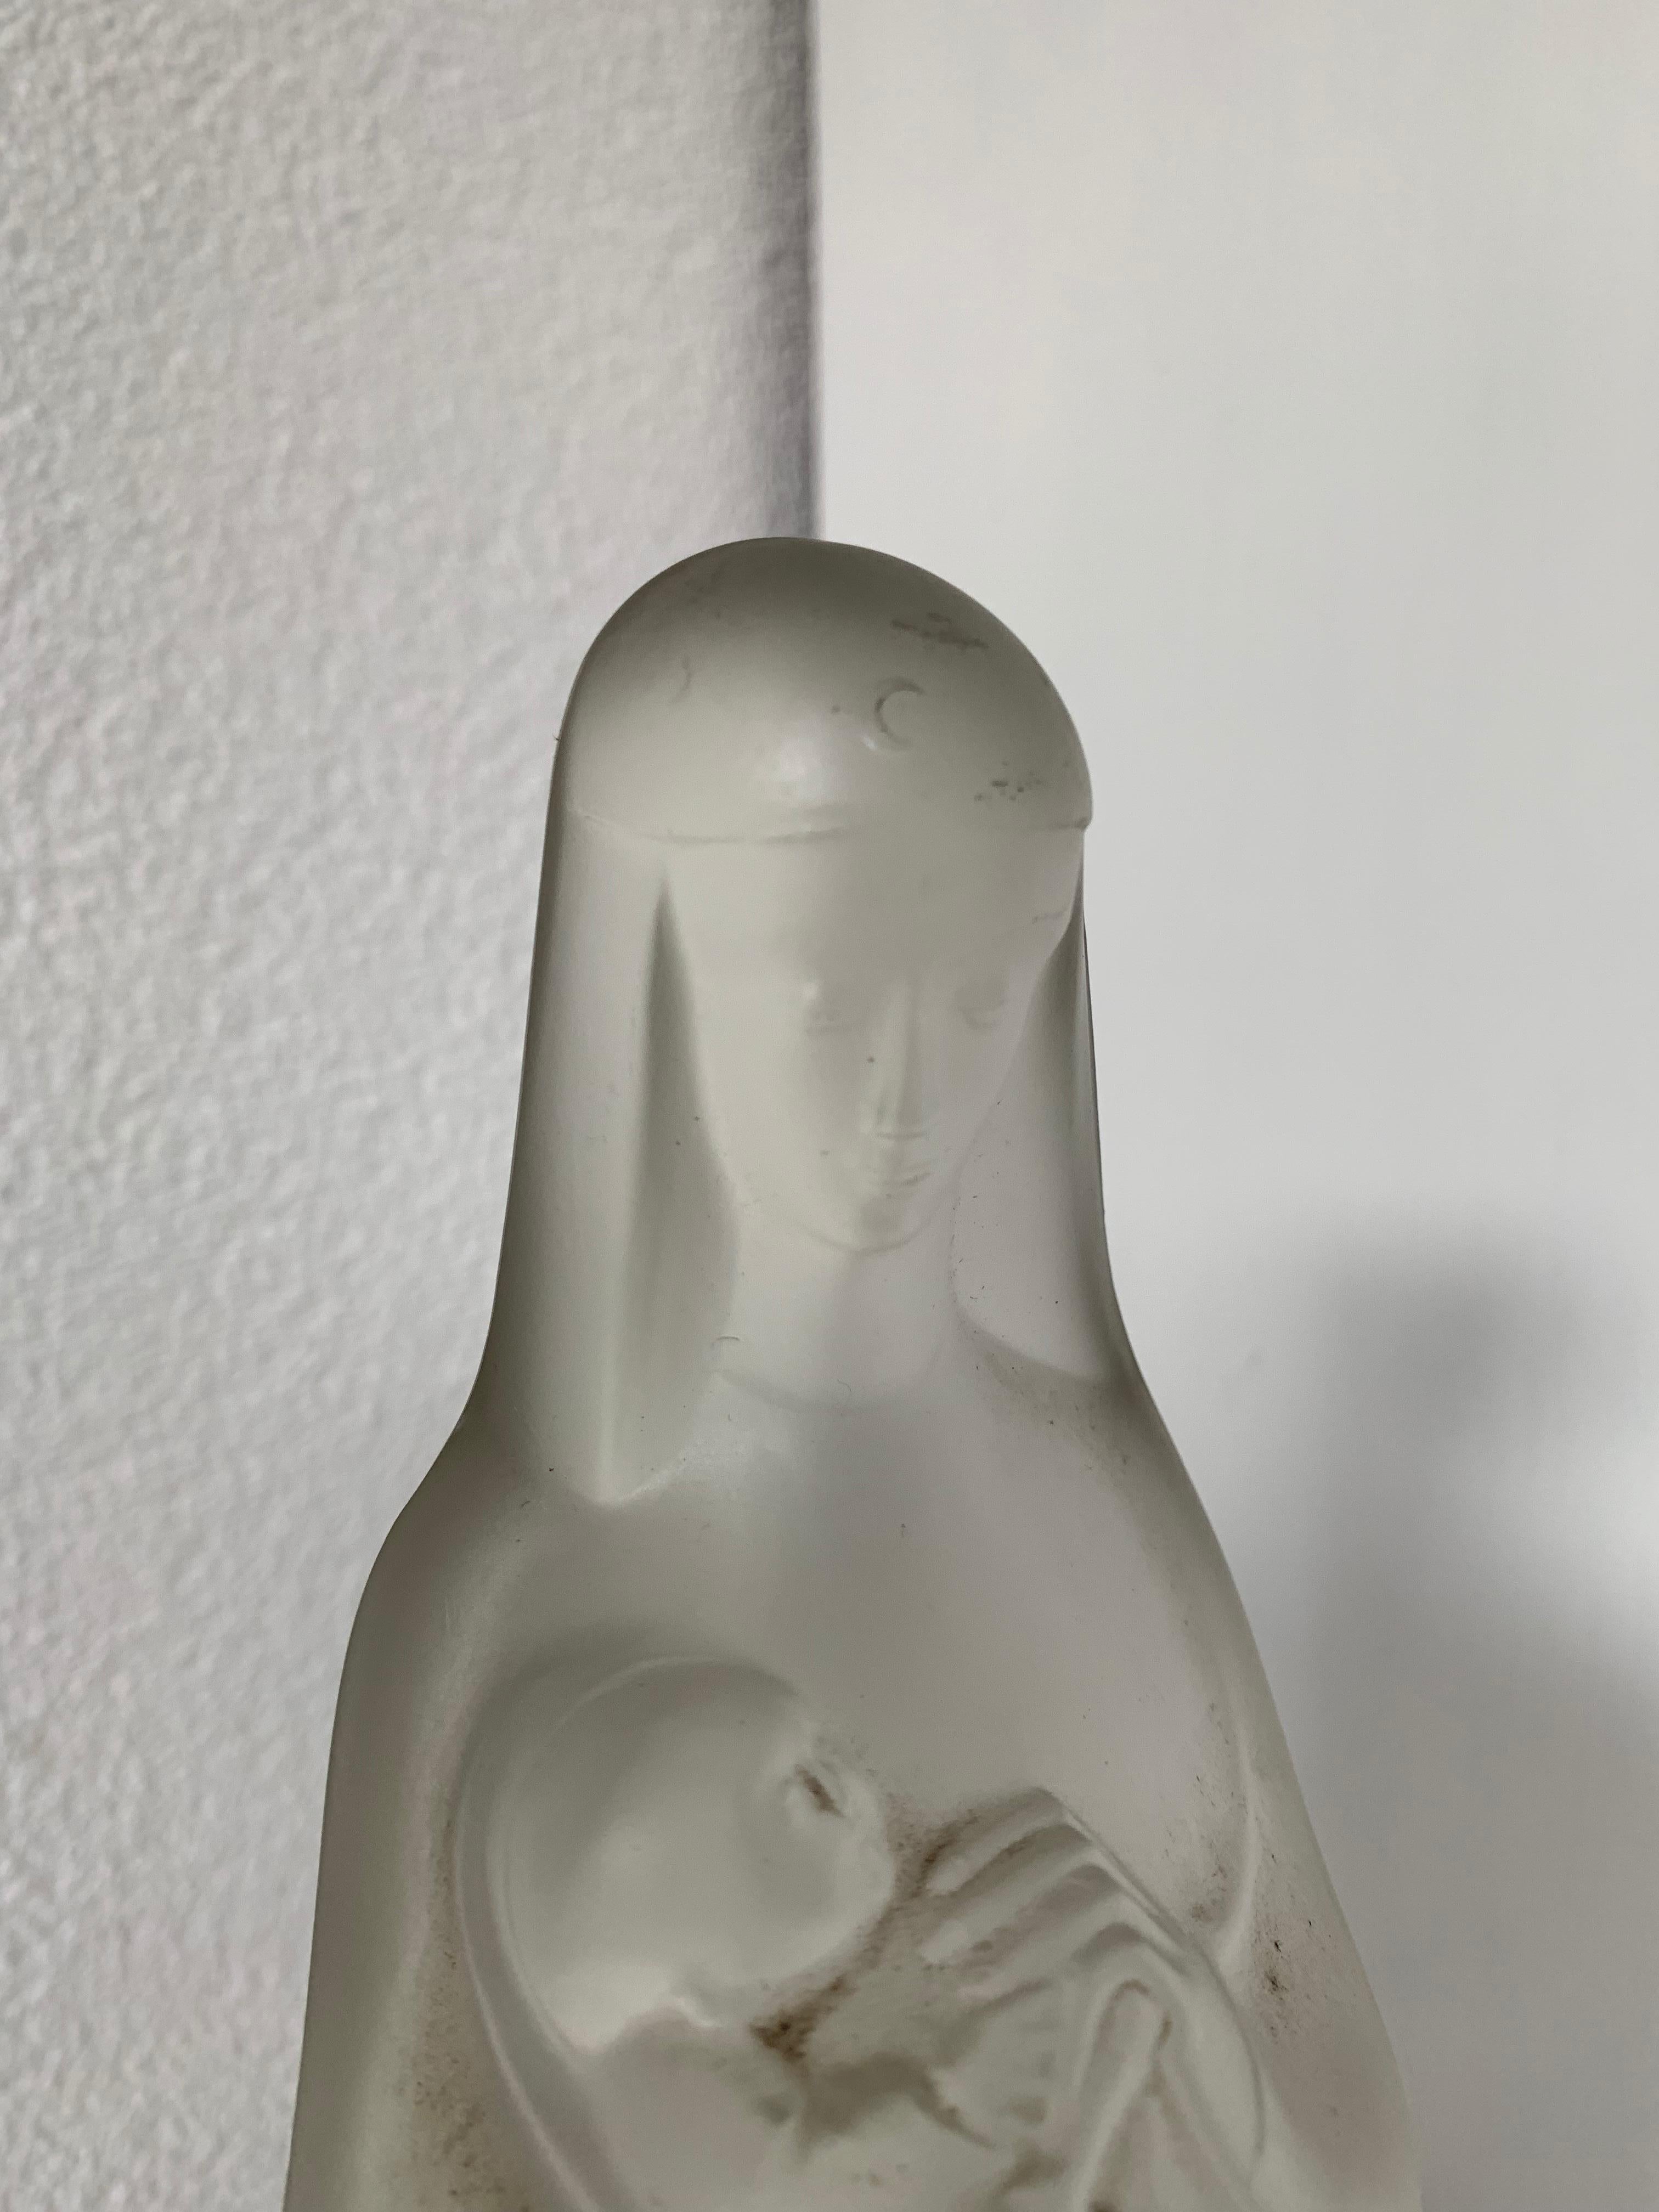 Stunning Design Glass Art Madonna and Child Jesus Sculpture w. Stand and Light For Sale 4